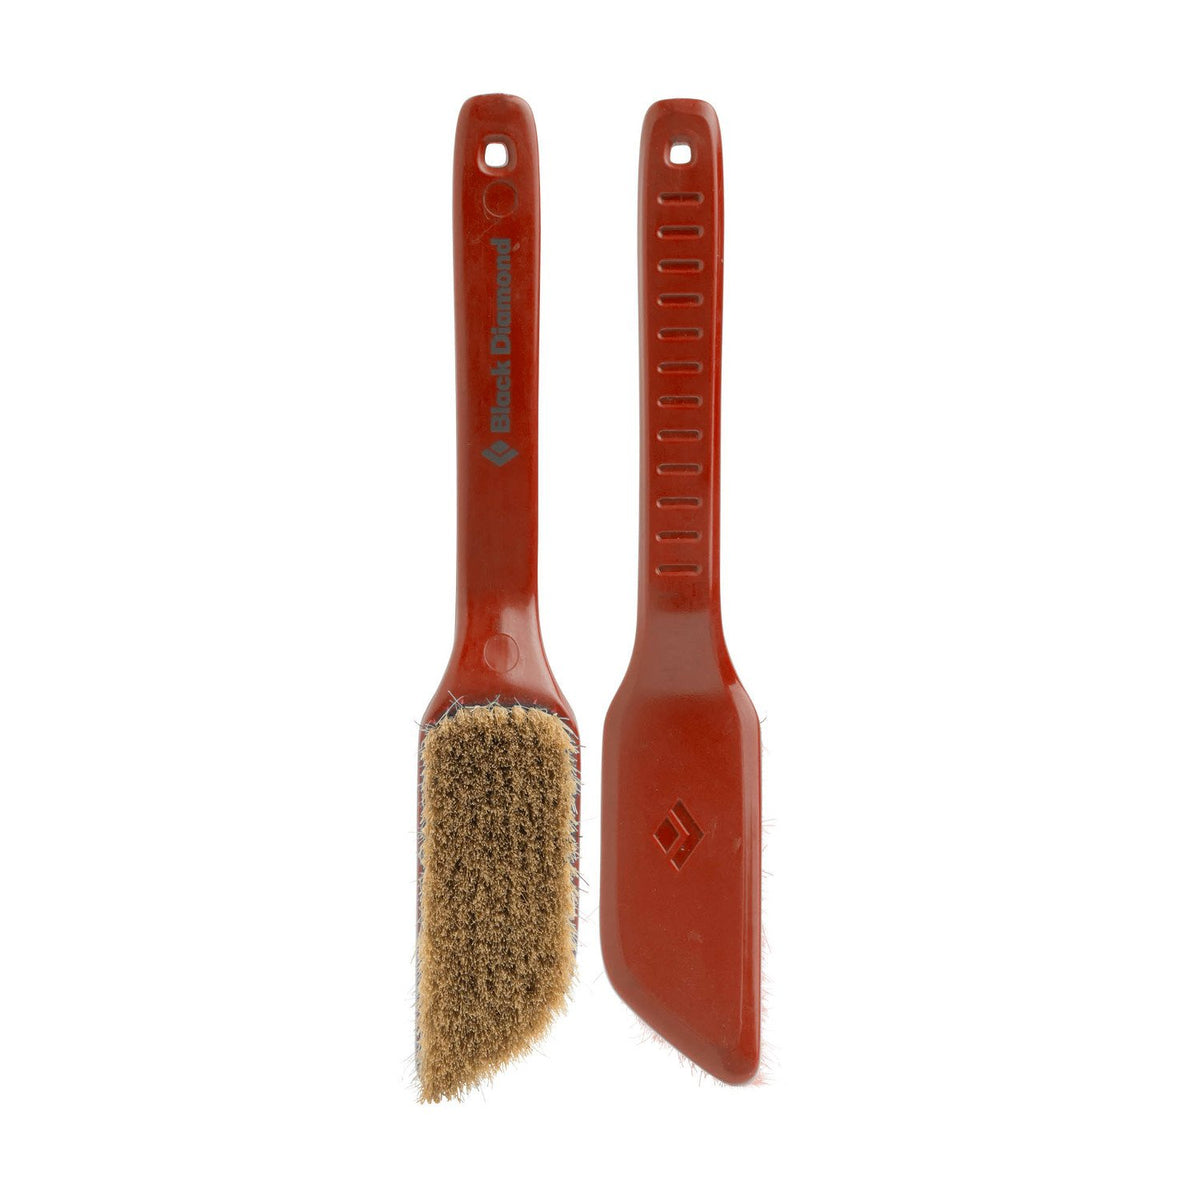 Pair of red Black Diamond Boars Hair Brushes - Medium, 1 shown facing and 1 shown in the reverse